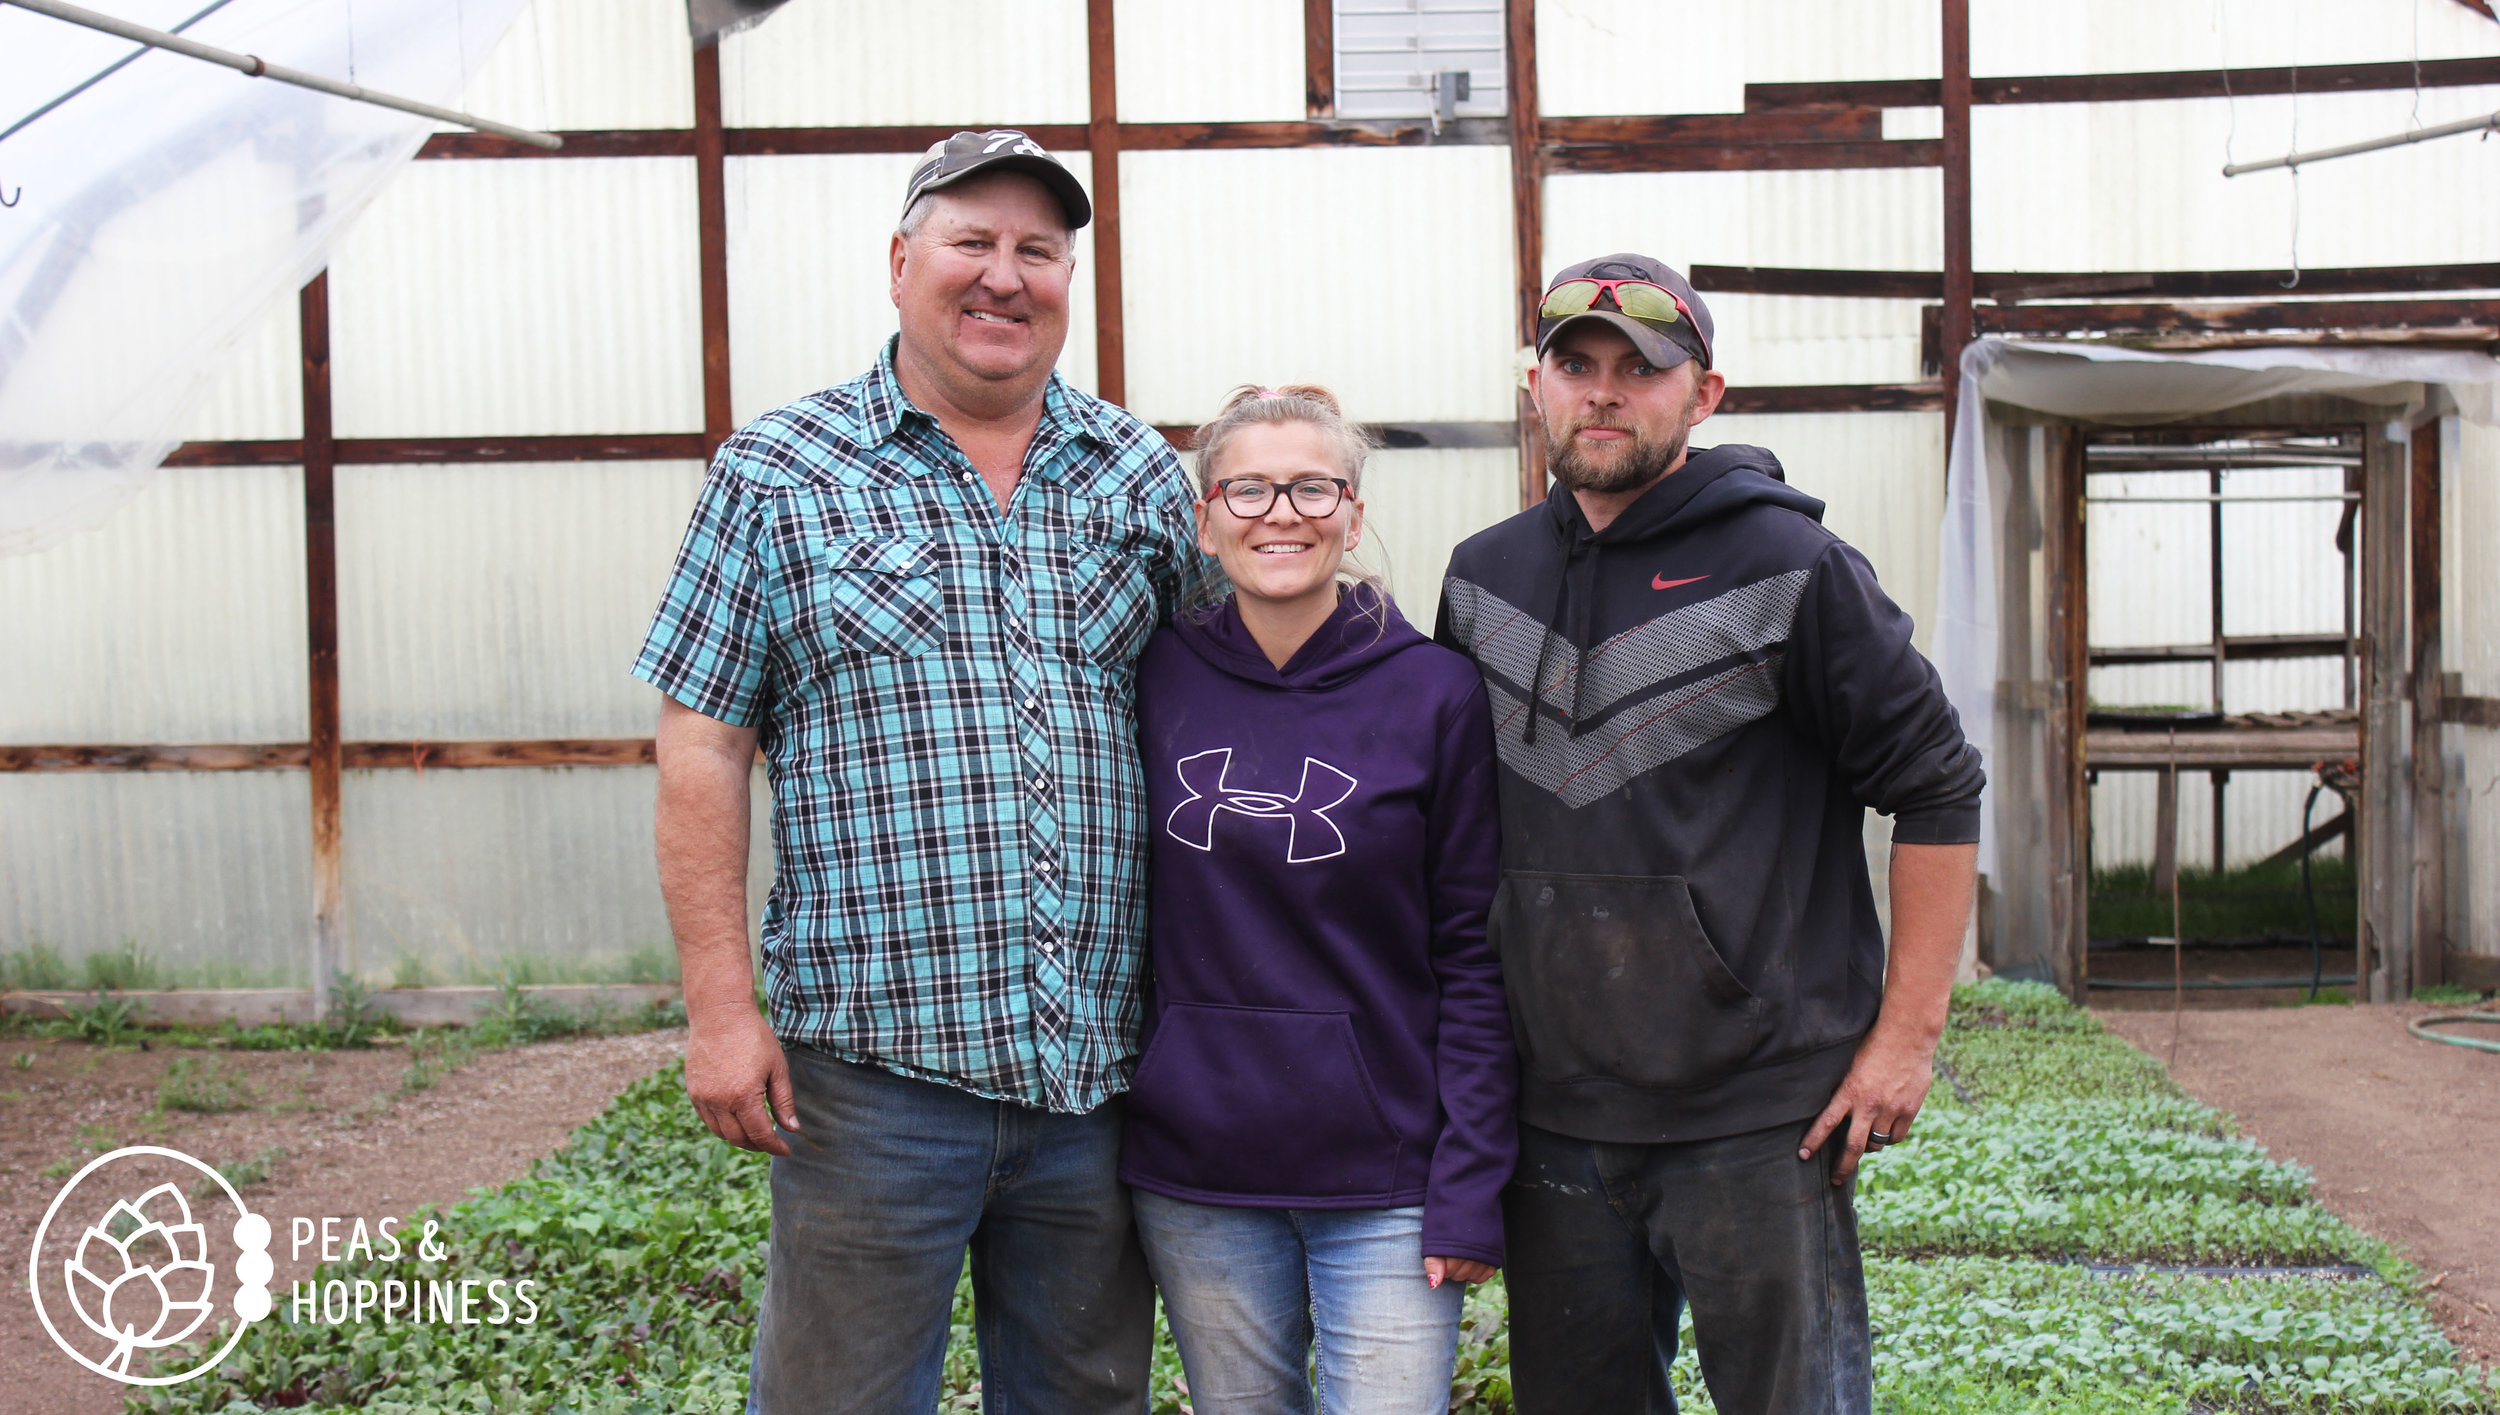 Meet Joe Miller and future farmers Shelli &amp; Andy. Not pictured: Joe’s wife and his six other children!